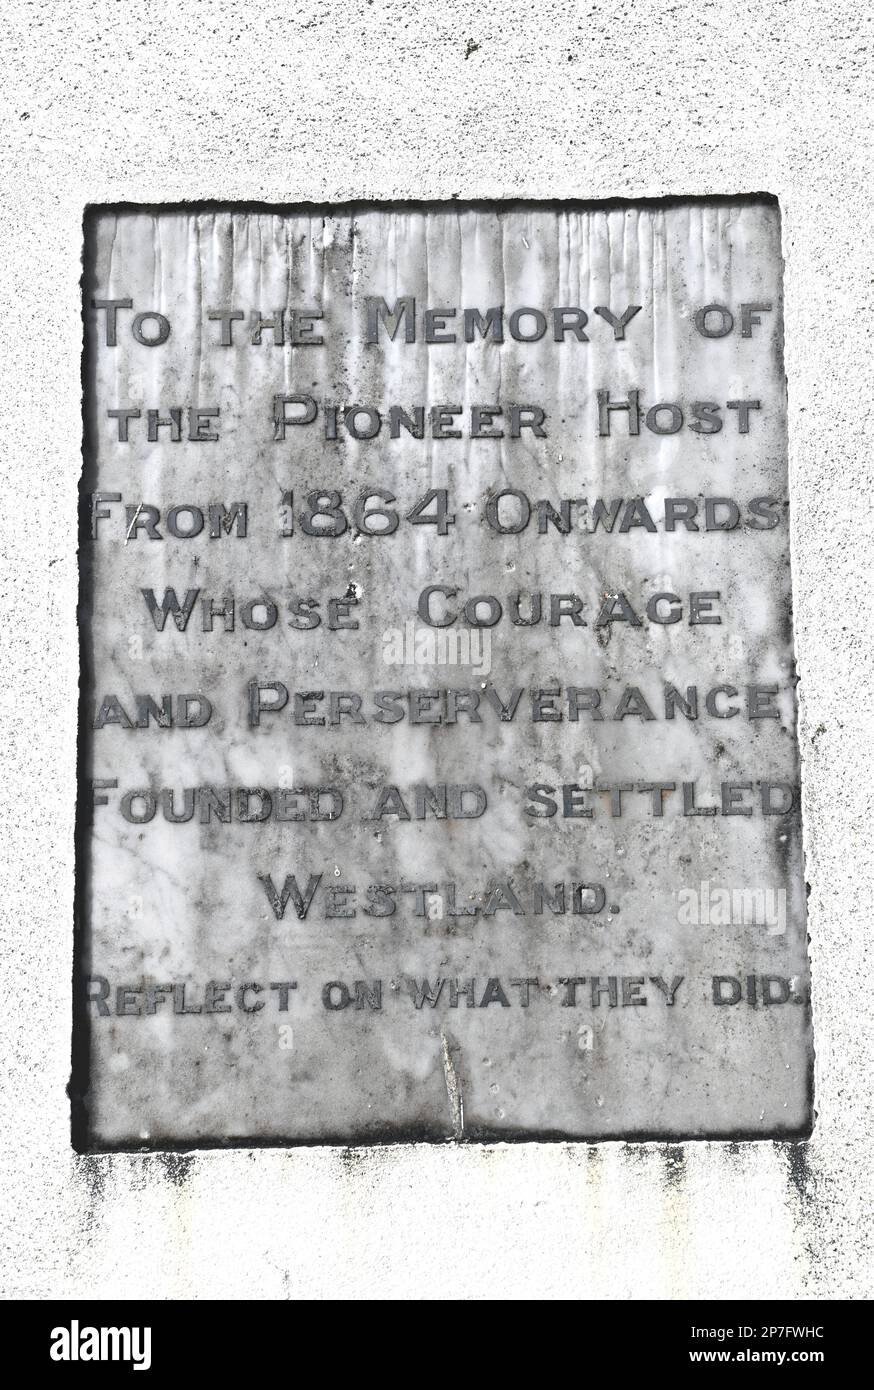 One of four commemorative plaques on an obelisk in Okarito, West Coast, erected to mark the centennial of the founding of New Zealand. Stock Photo